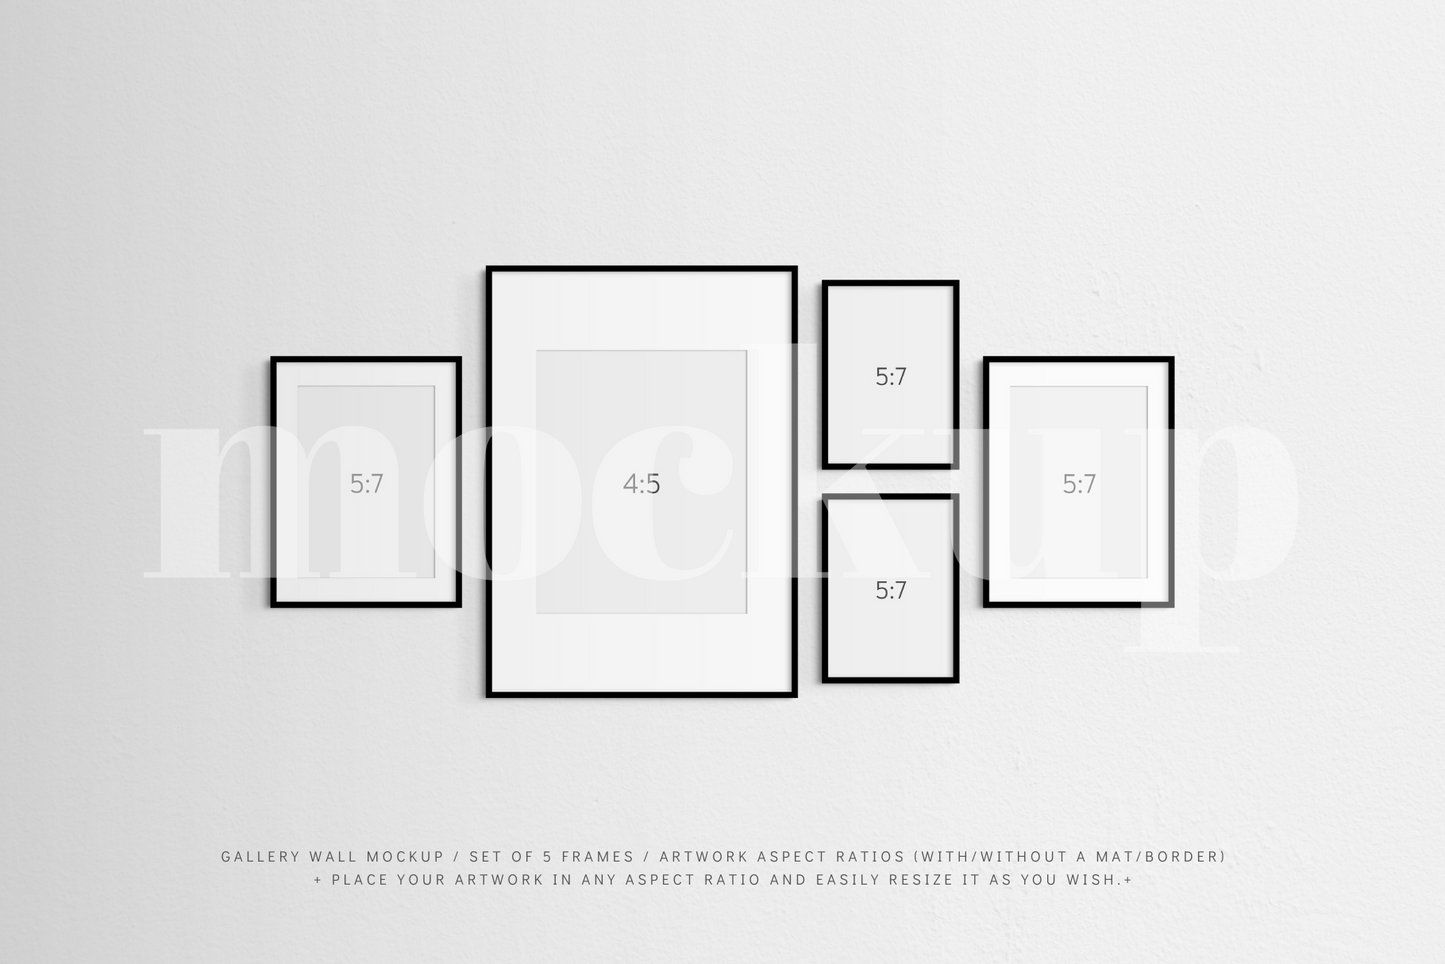 A gallery wall frame mockup that features a set of 5 thin black frames with or without a white mat (passe-partout) border.